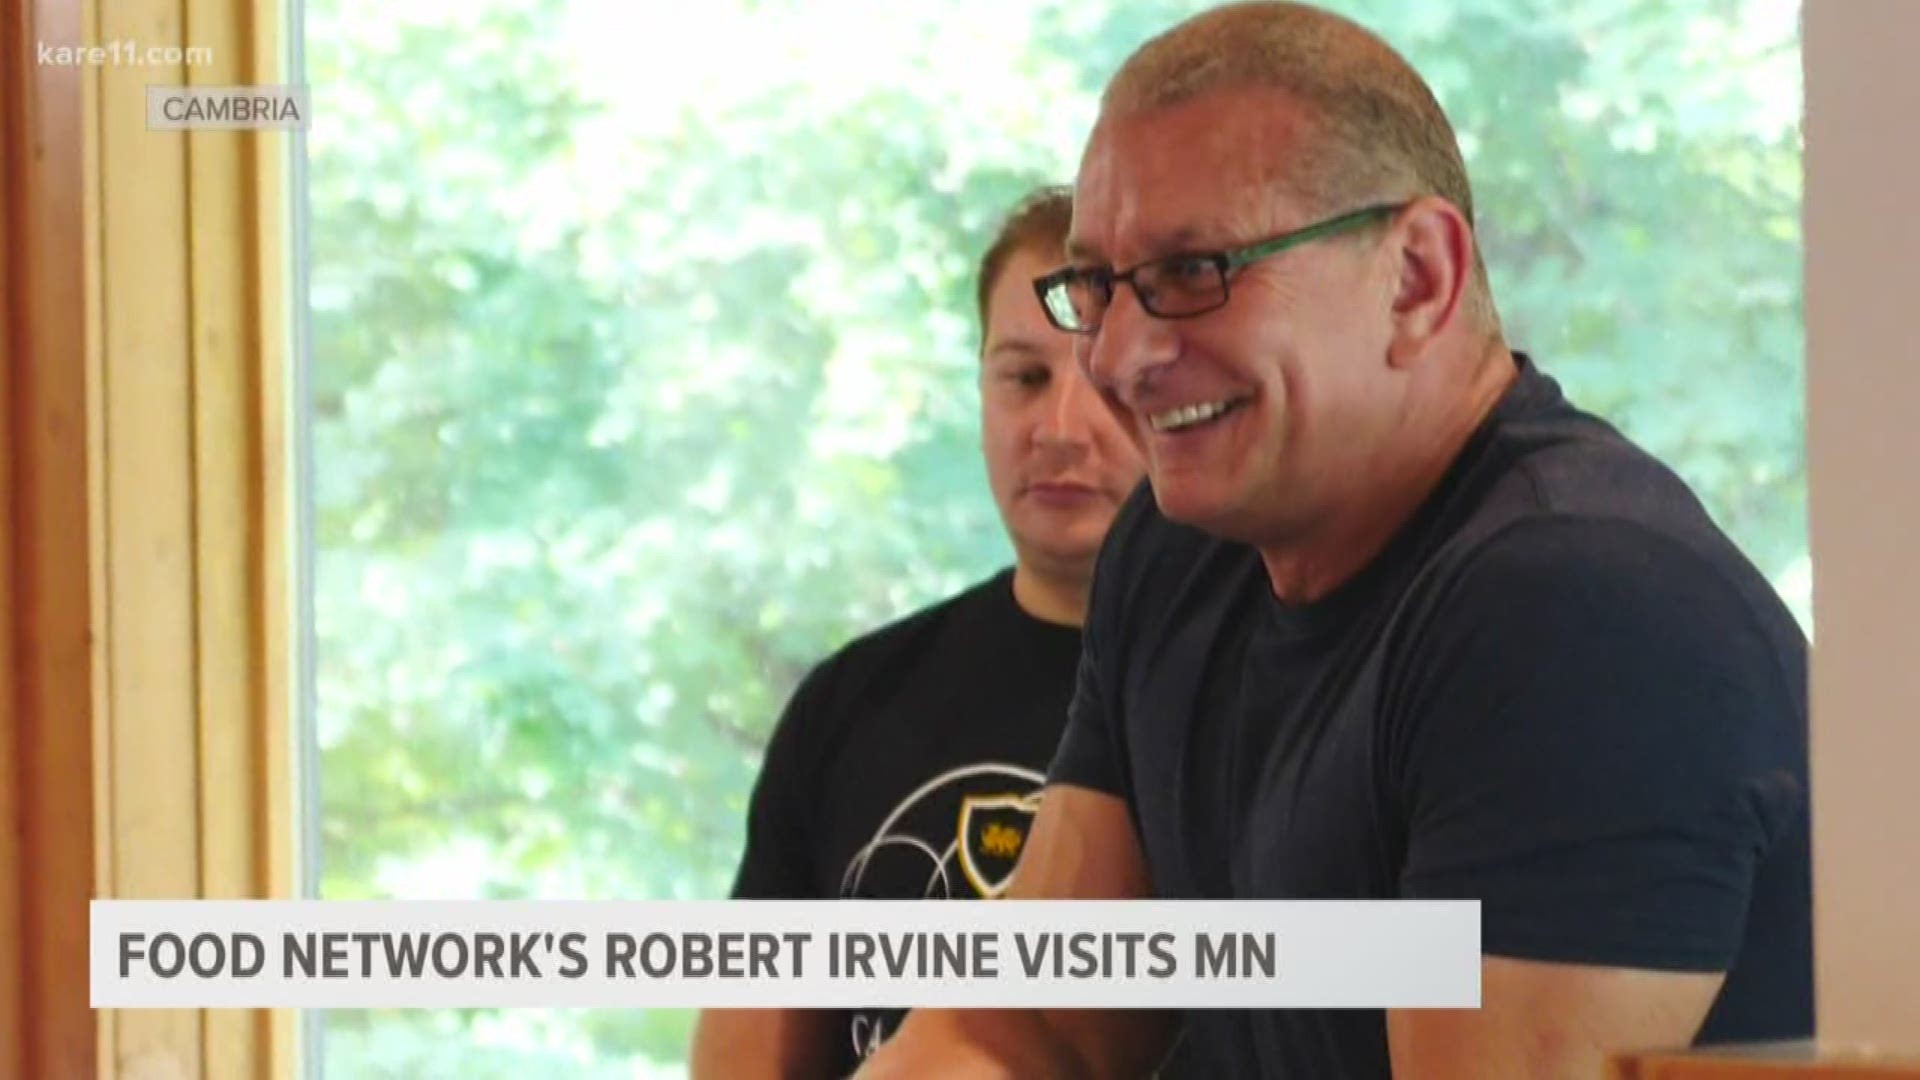 World-class chef and Food Network TV personality Robert Irvine stopped by the station to show off his "softer side."